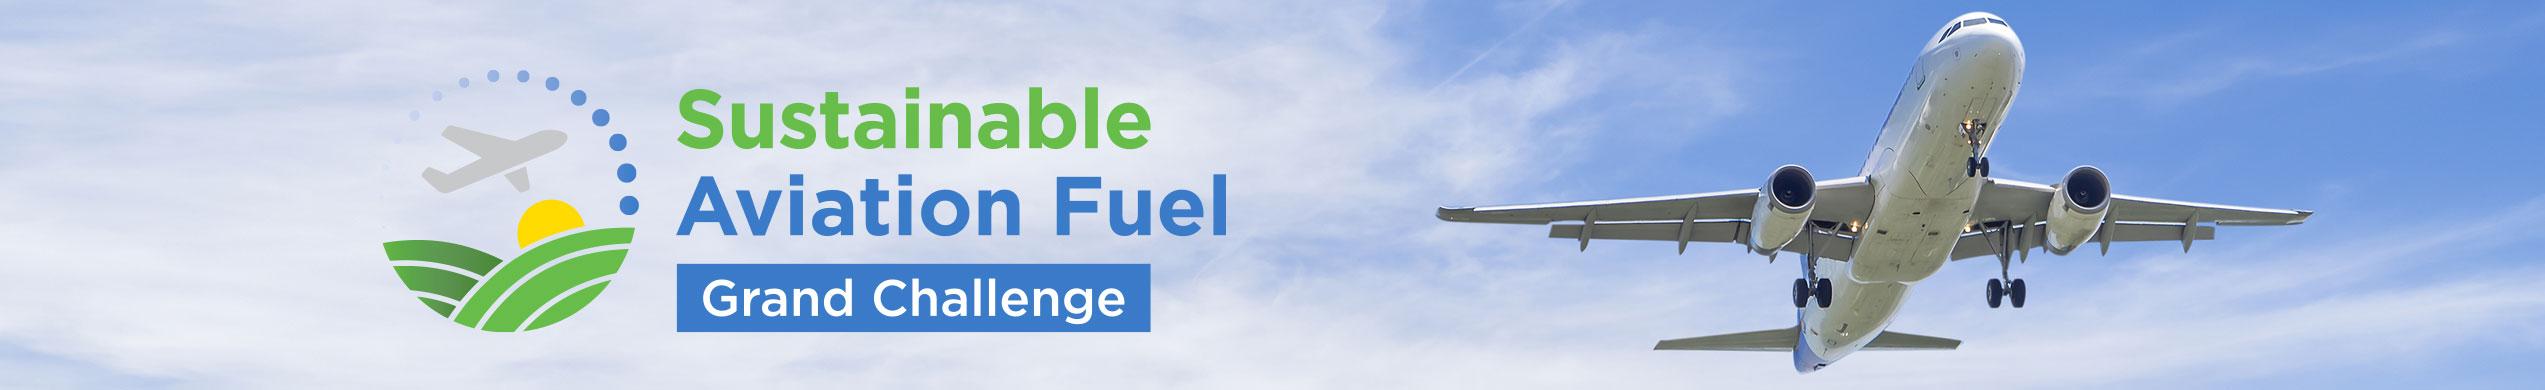 An airplane taking off in the sky with the Sustainable Aviation Fuel Grand Challenge logo in the background.